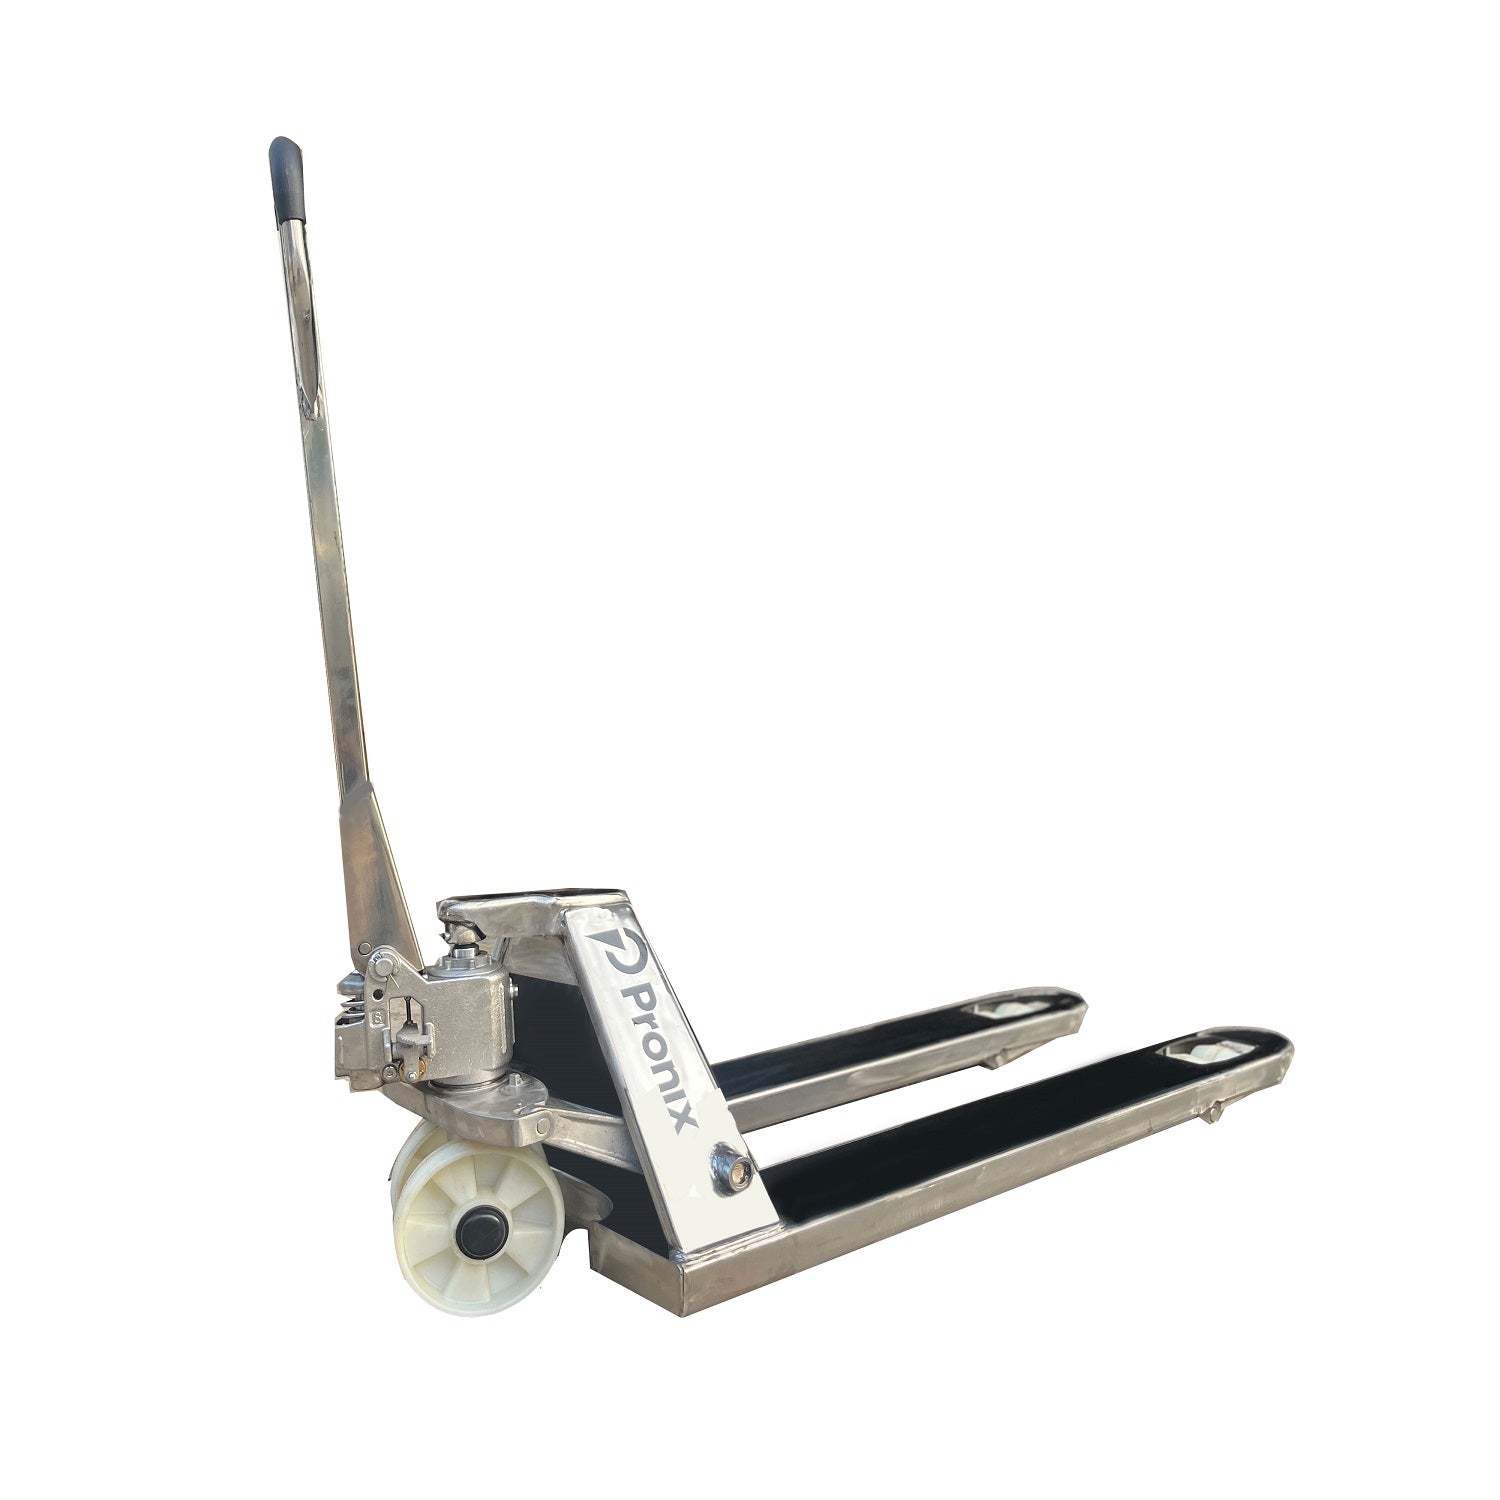 Pronix Stainless Steel Hand Pallet Truck 2.5 Ton with Fork Length 1150x550mm PNXPT-25SS